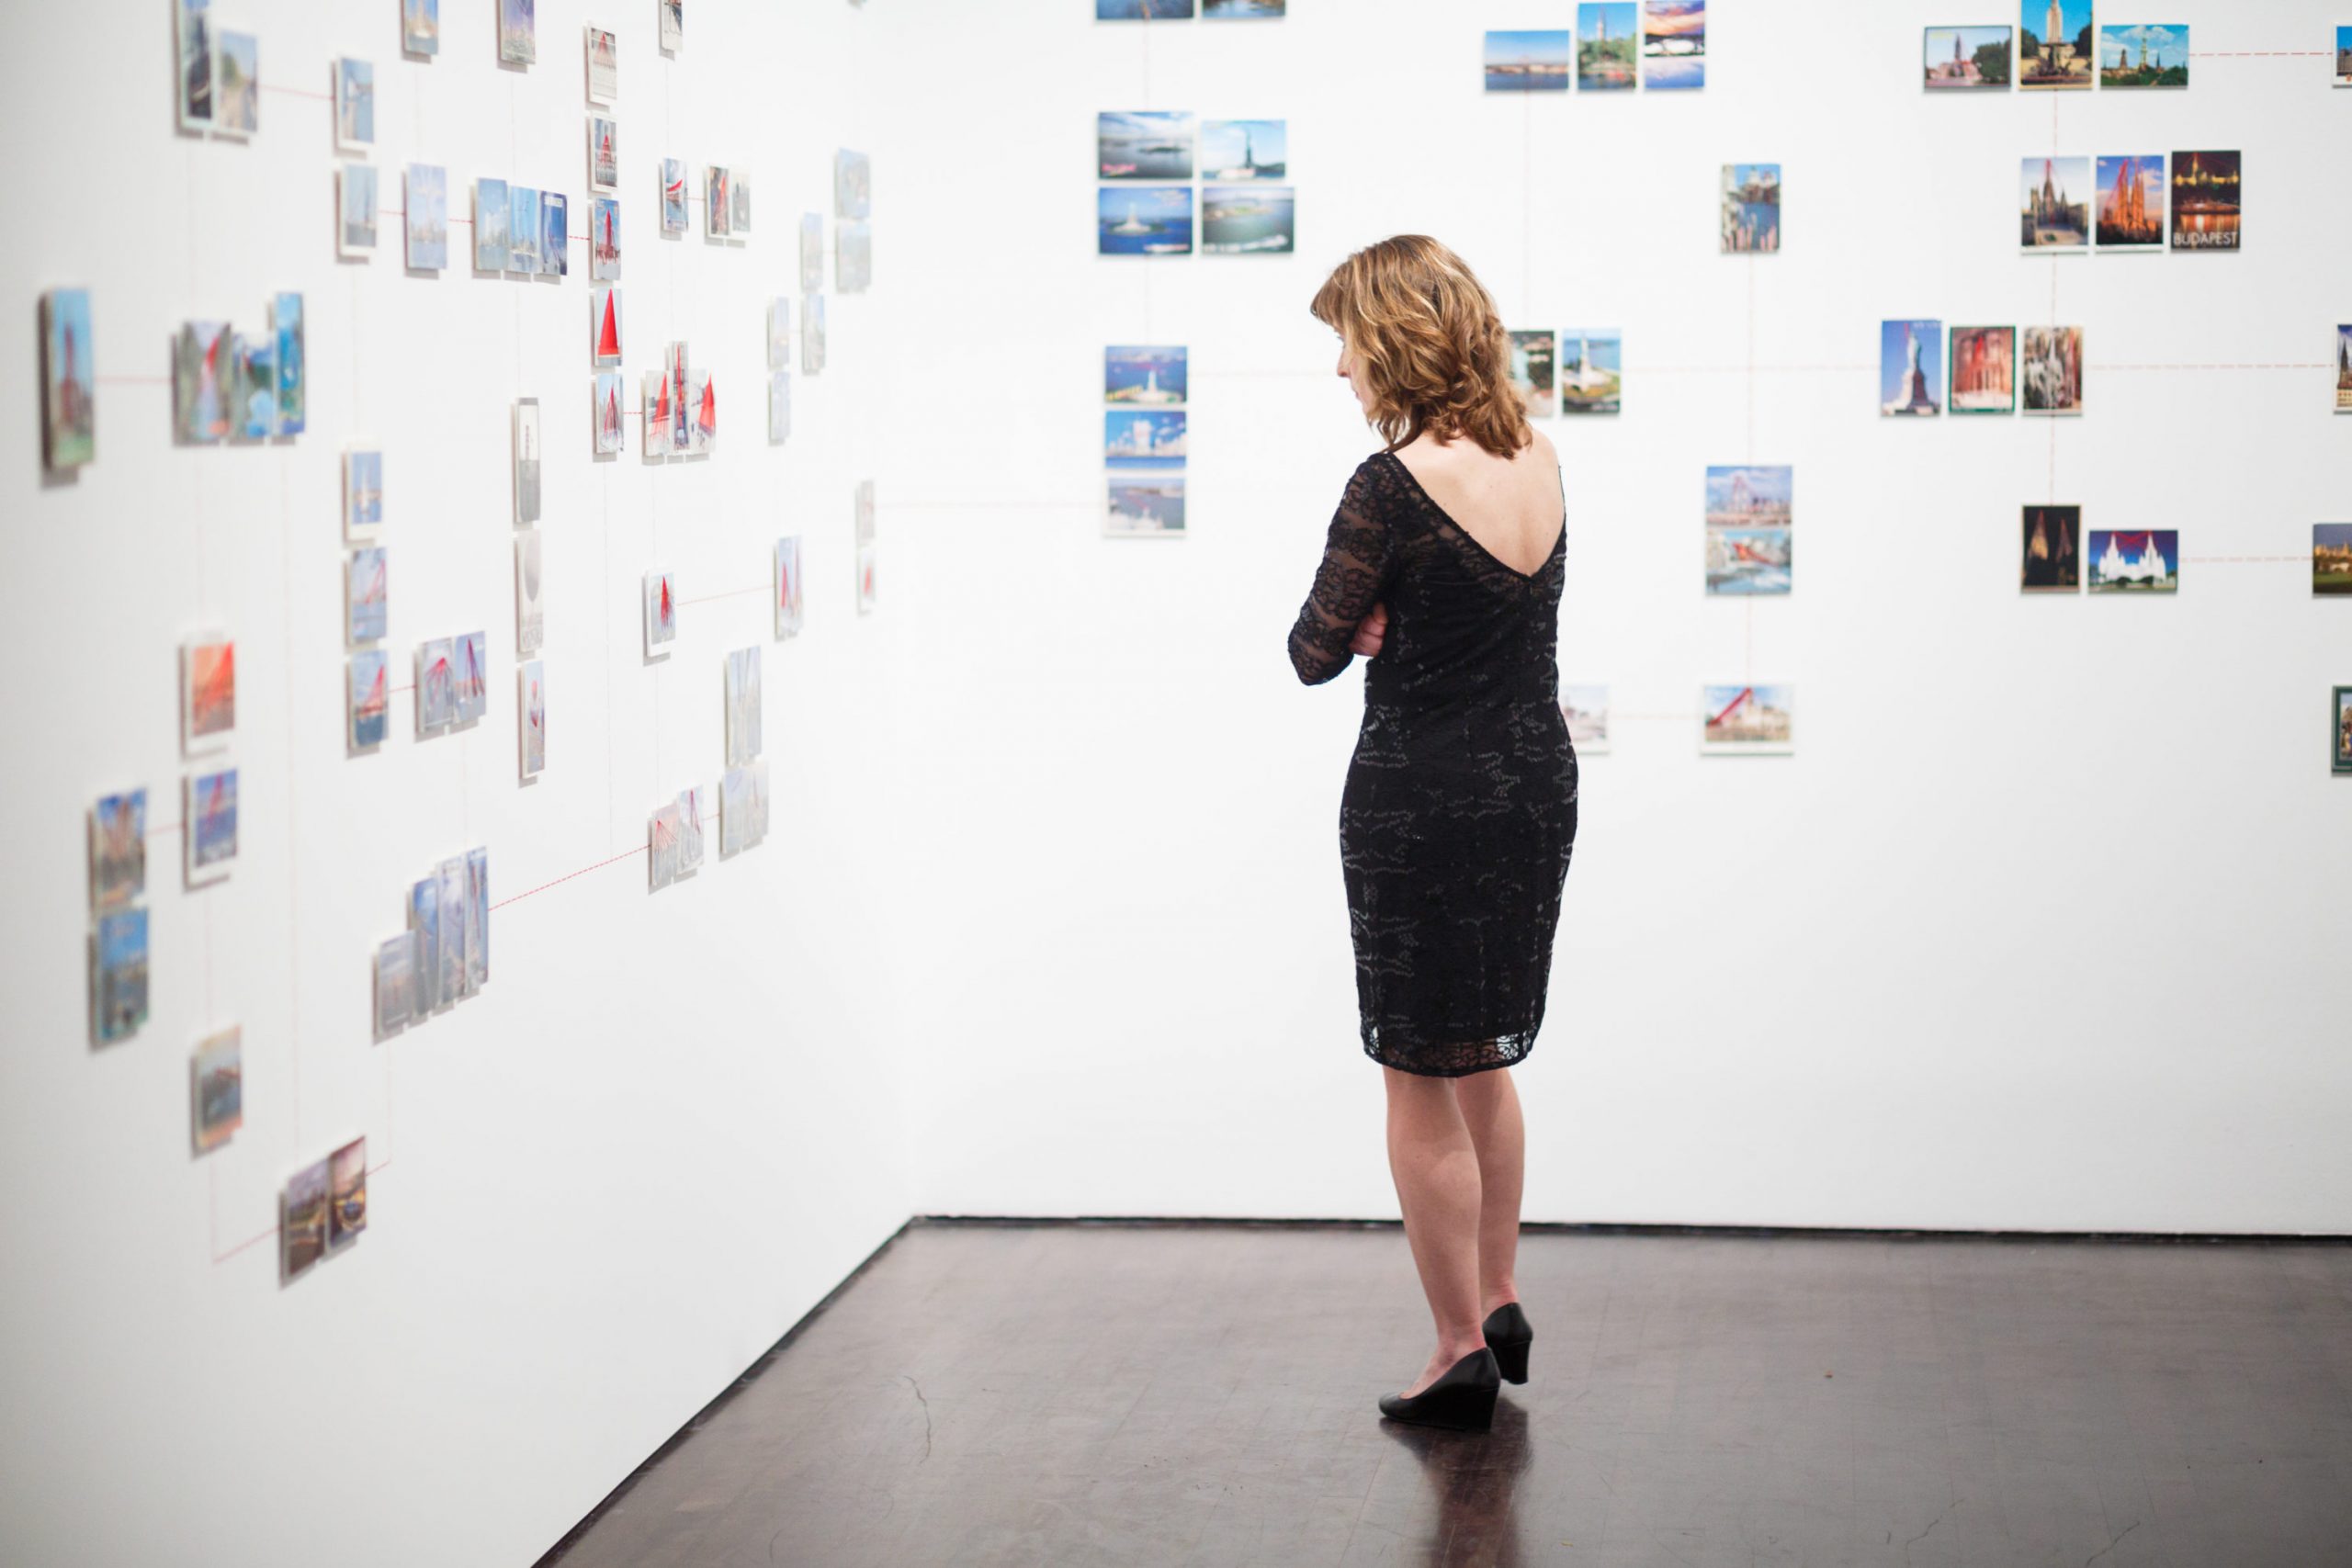 a lone woman in a black dress stands a few feet away from the corner of the temporary exhibition gallery featuring 